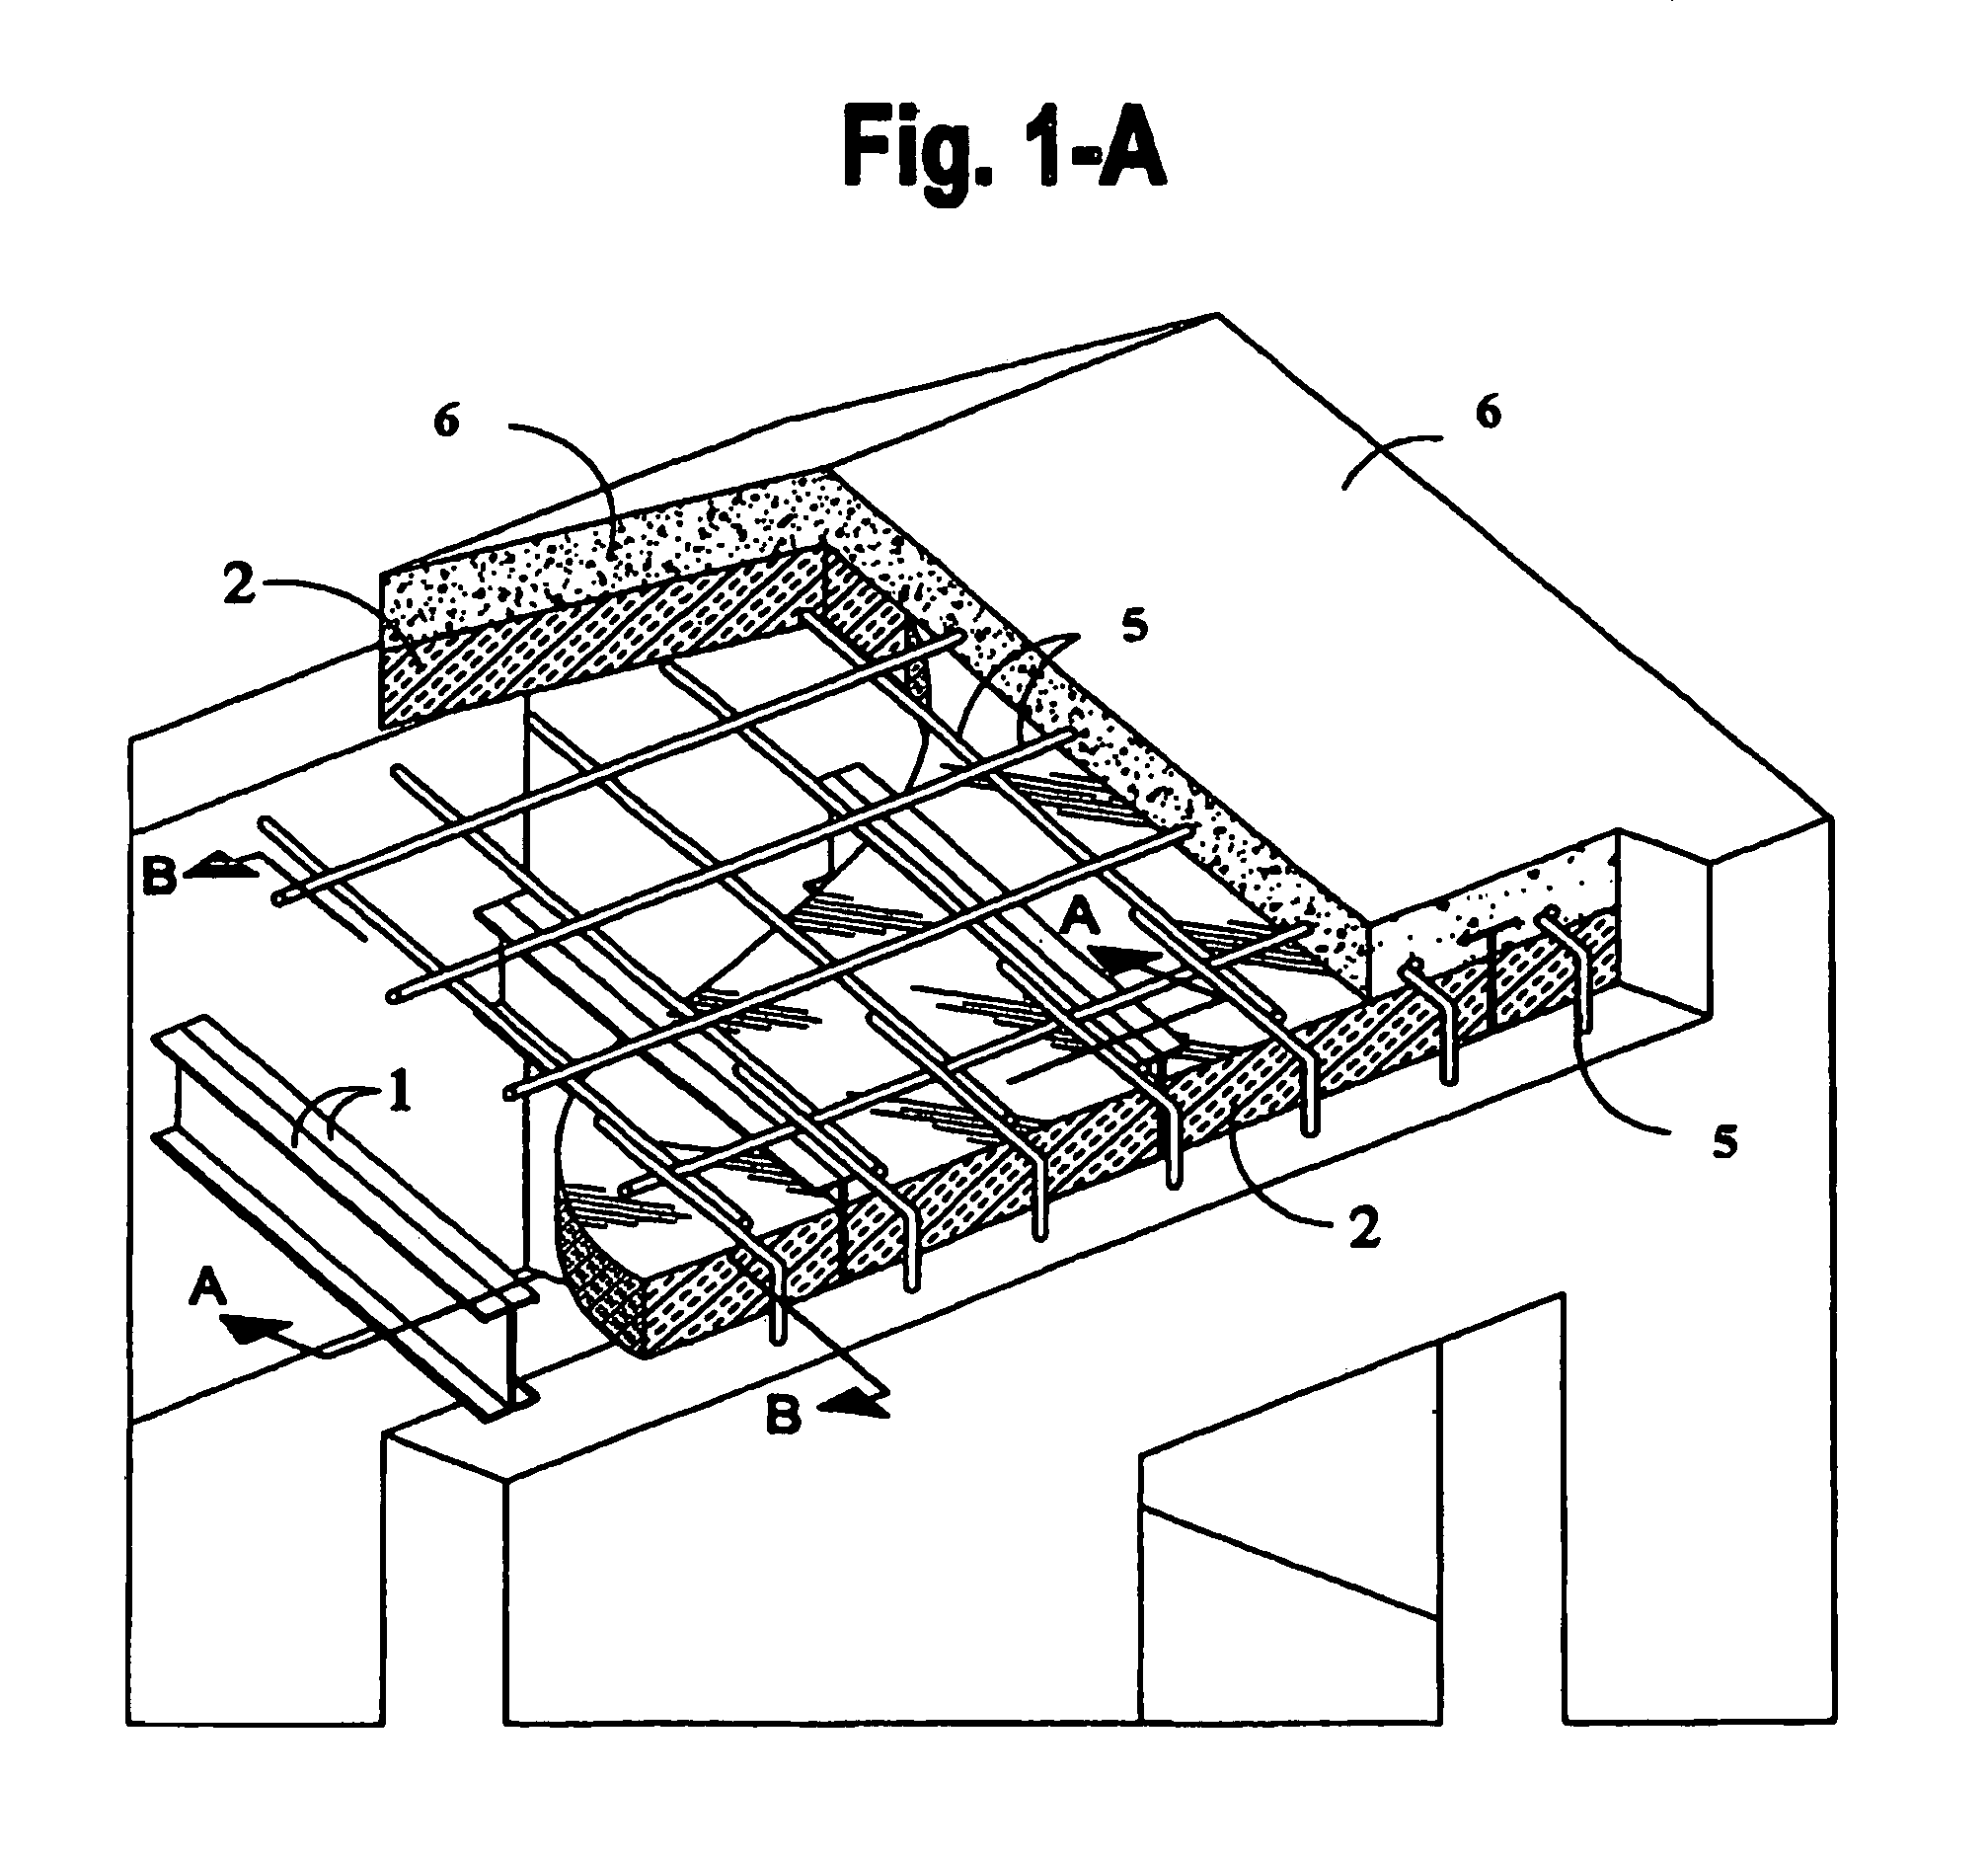 Concrete slab system with self-supported insulation